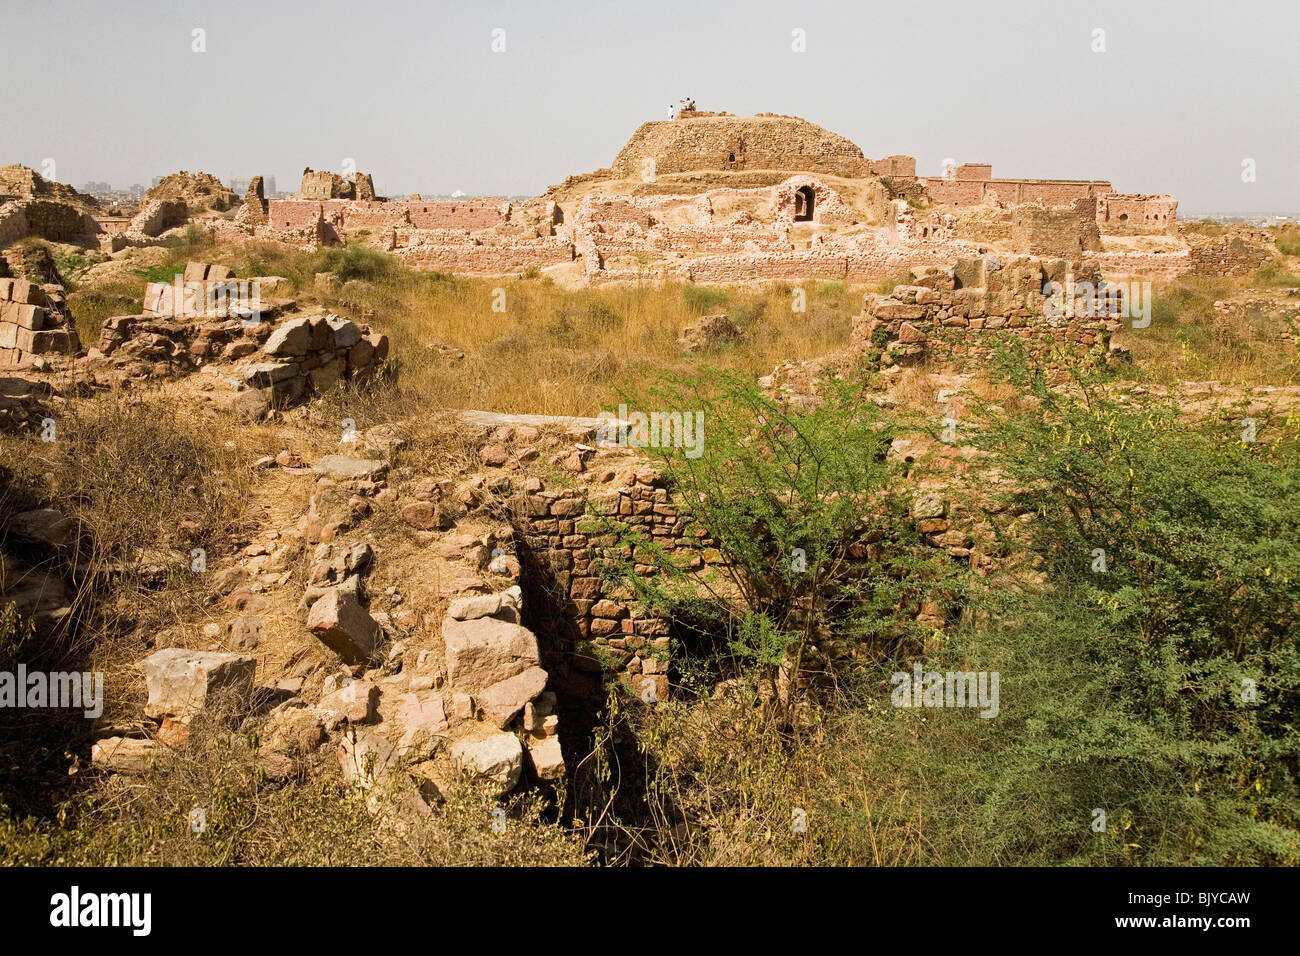 The ruined citadel of Tughluqabad Fortress, constructed under Ghiyas-ud-Din in 1321 AD, in Delhi, India Stock Photo